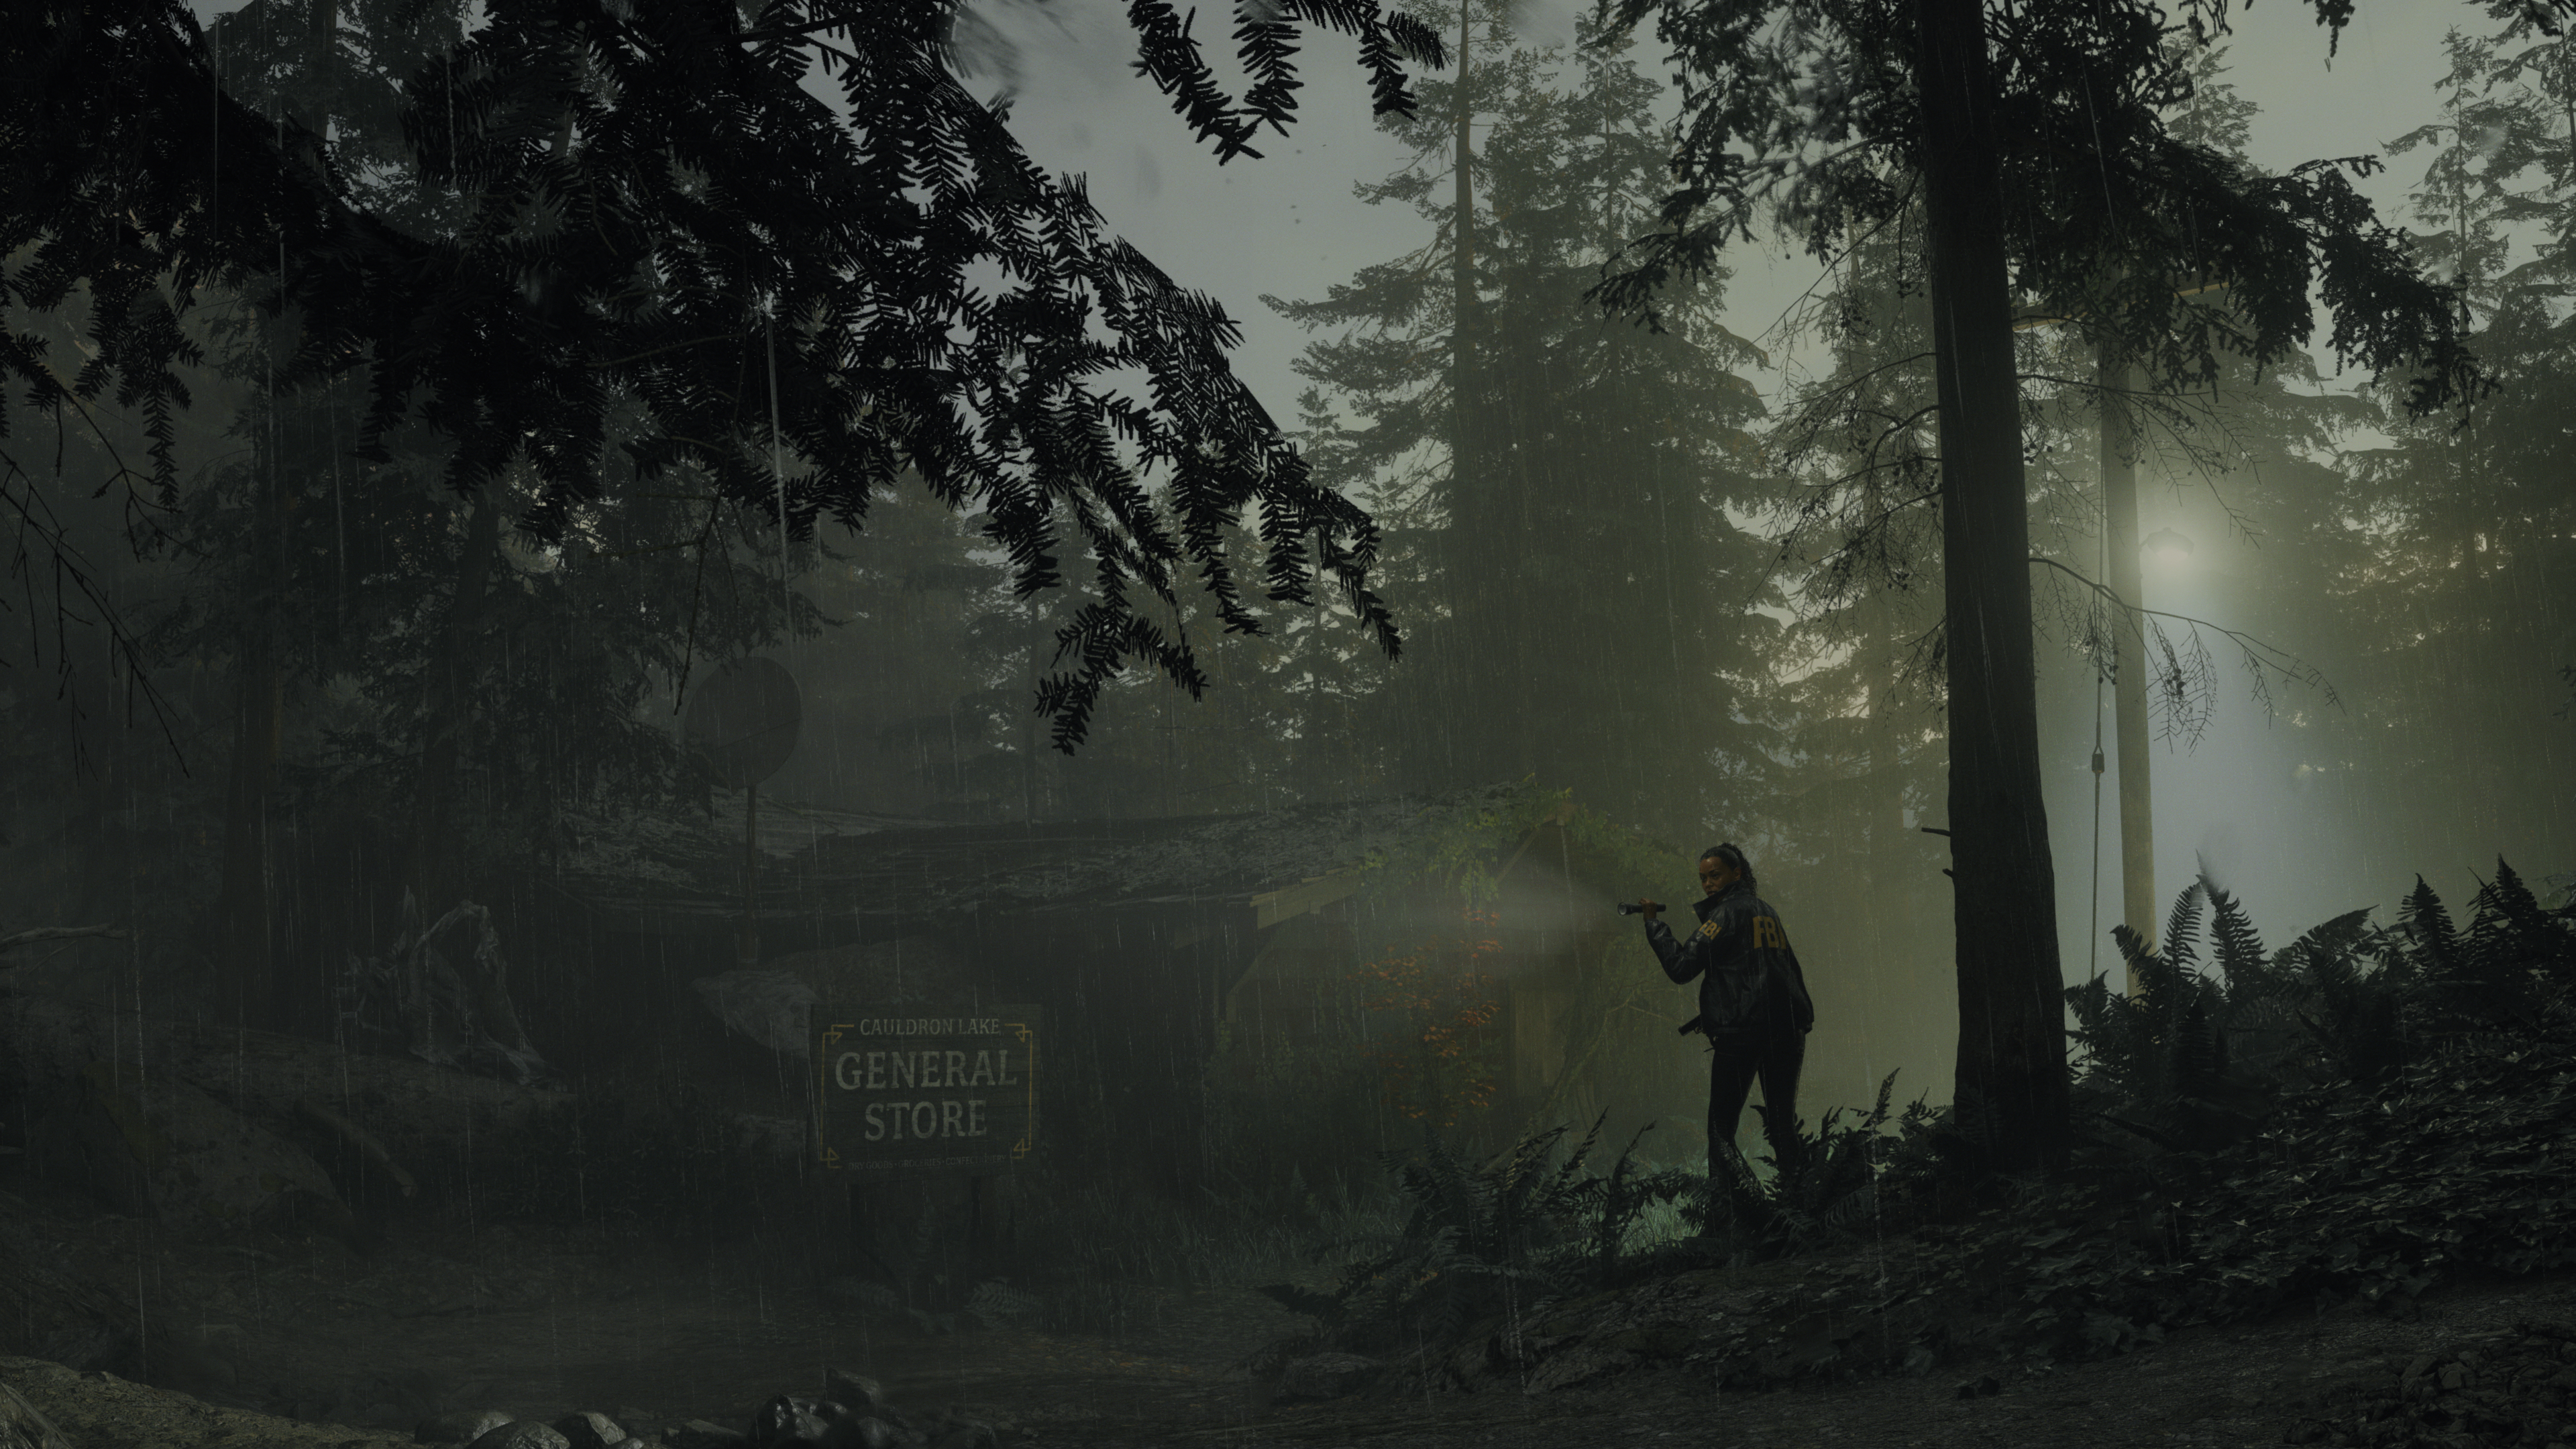 Alan Wake 2 Release Date and Time